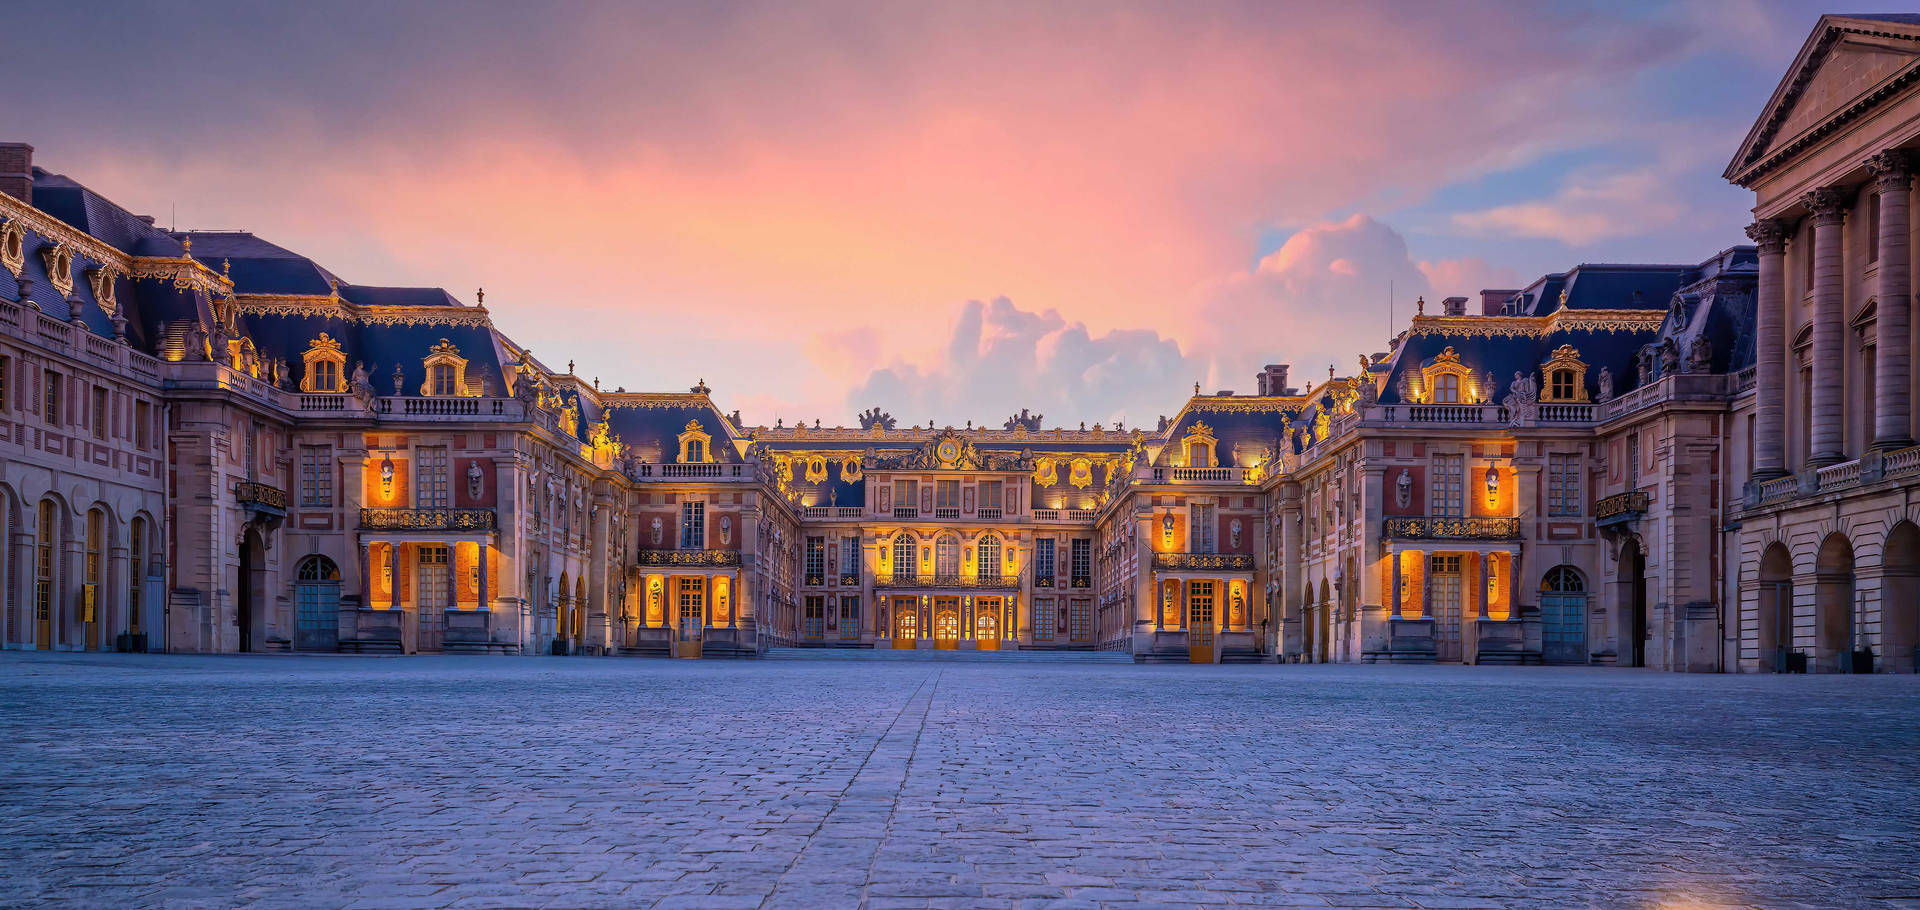 Sunset At The Marble Courtyard At The Palace Of Versailles